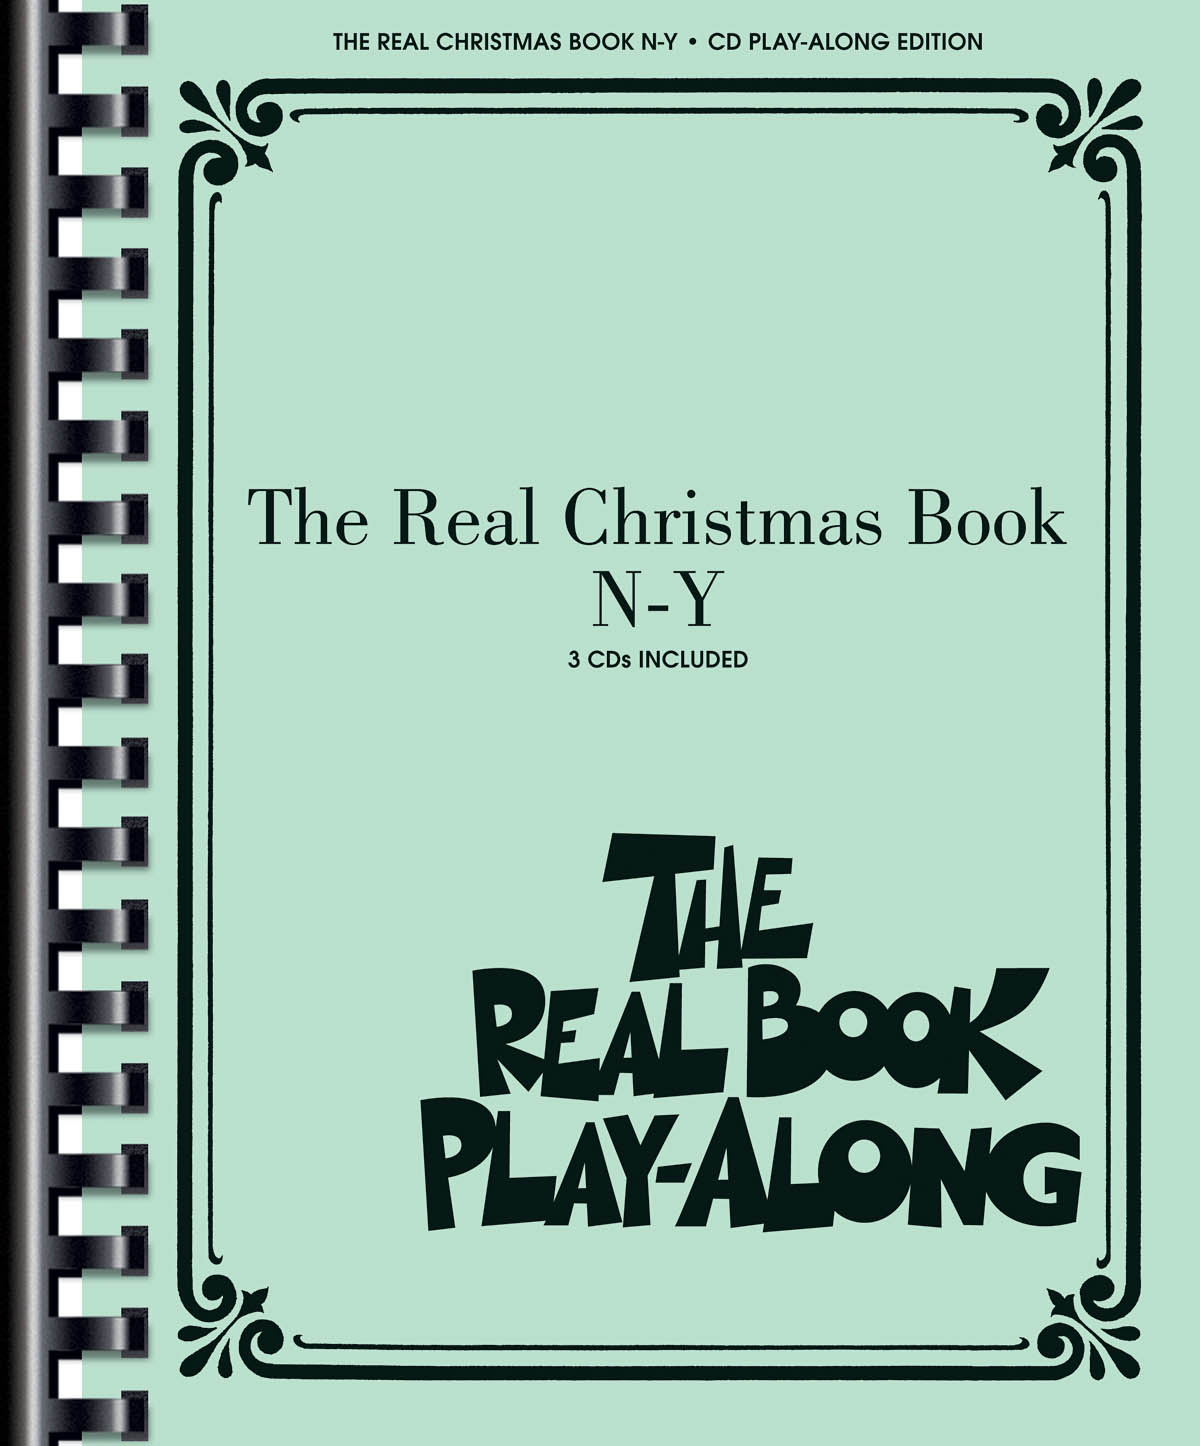 The Real Christmas Book Play-Along  Vol. N-Y: Jazz Ensemble: Mixed Songbook